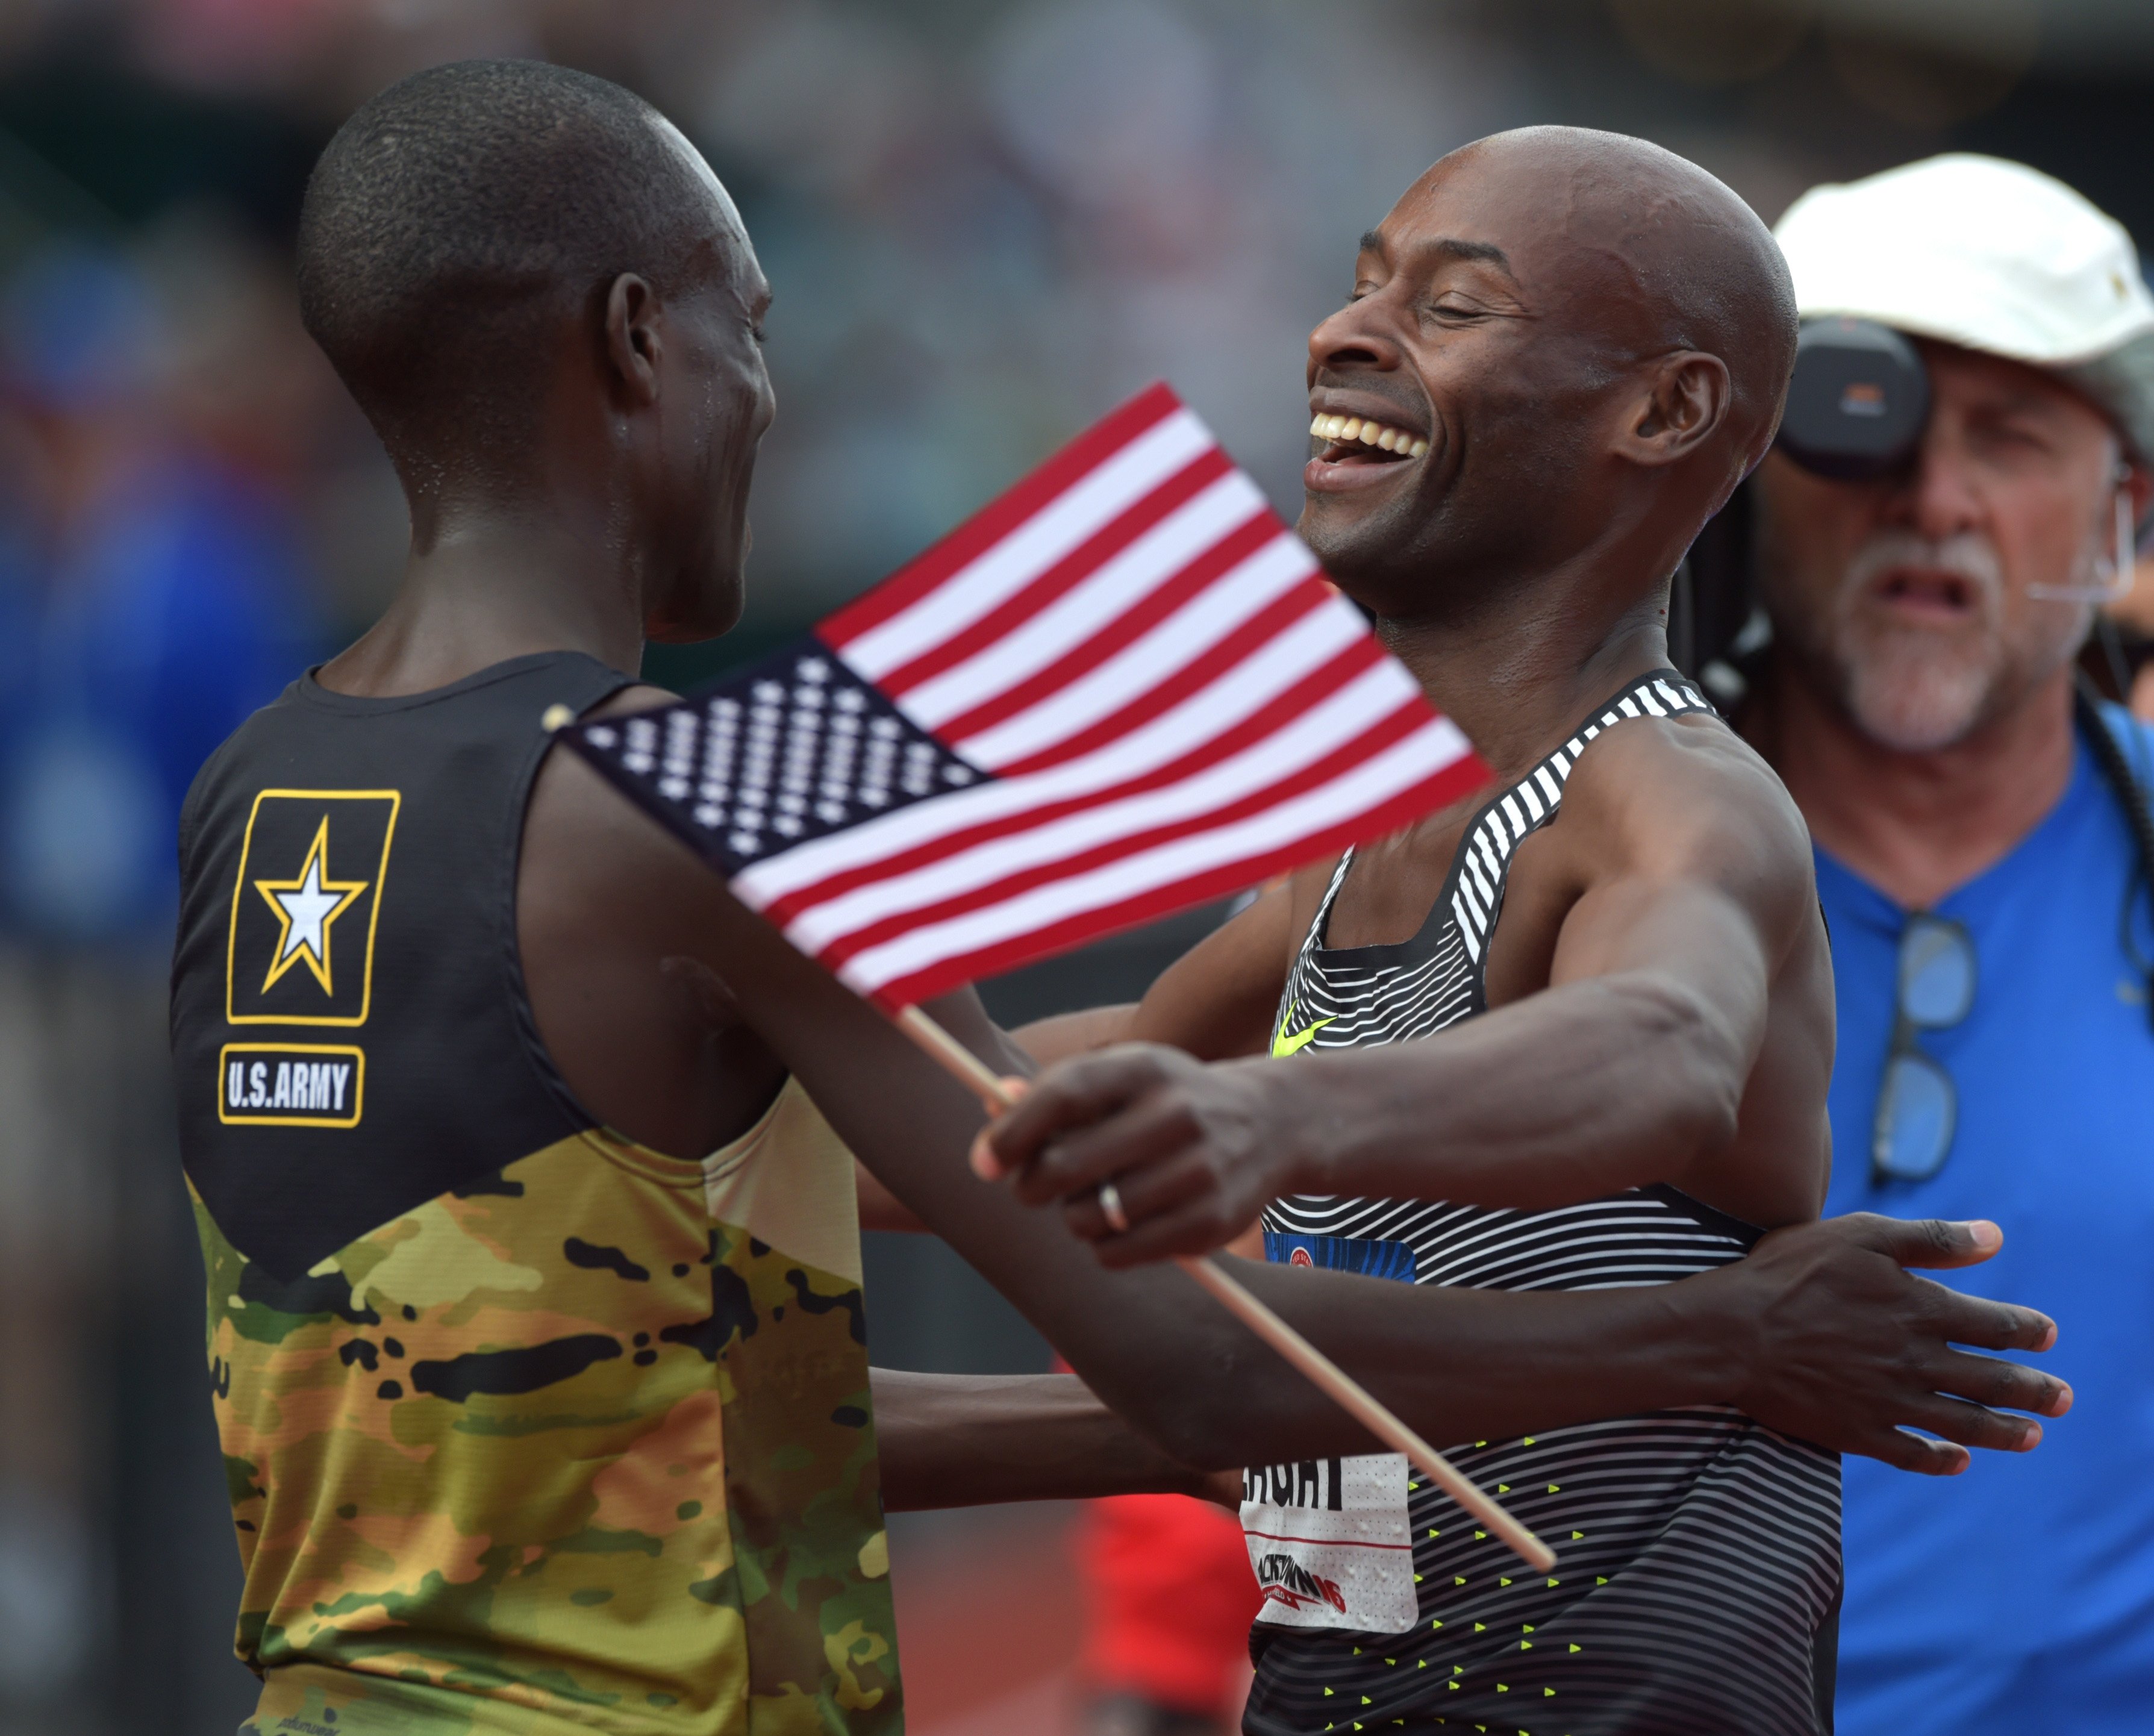 Jul 9, 2016; Eugene, OR, USA; Bernard Lagat (right) reacts with Shadrack Kipchirchir (left) after winning the men's 5000m final during the 2016 U.S. Olympic track and field team trials at Hayward Field. Mandatory Credit: Glenn Andrews-USA TODAY Sports